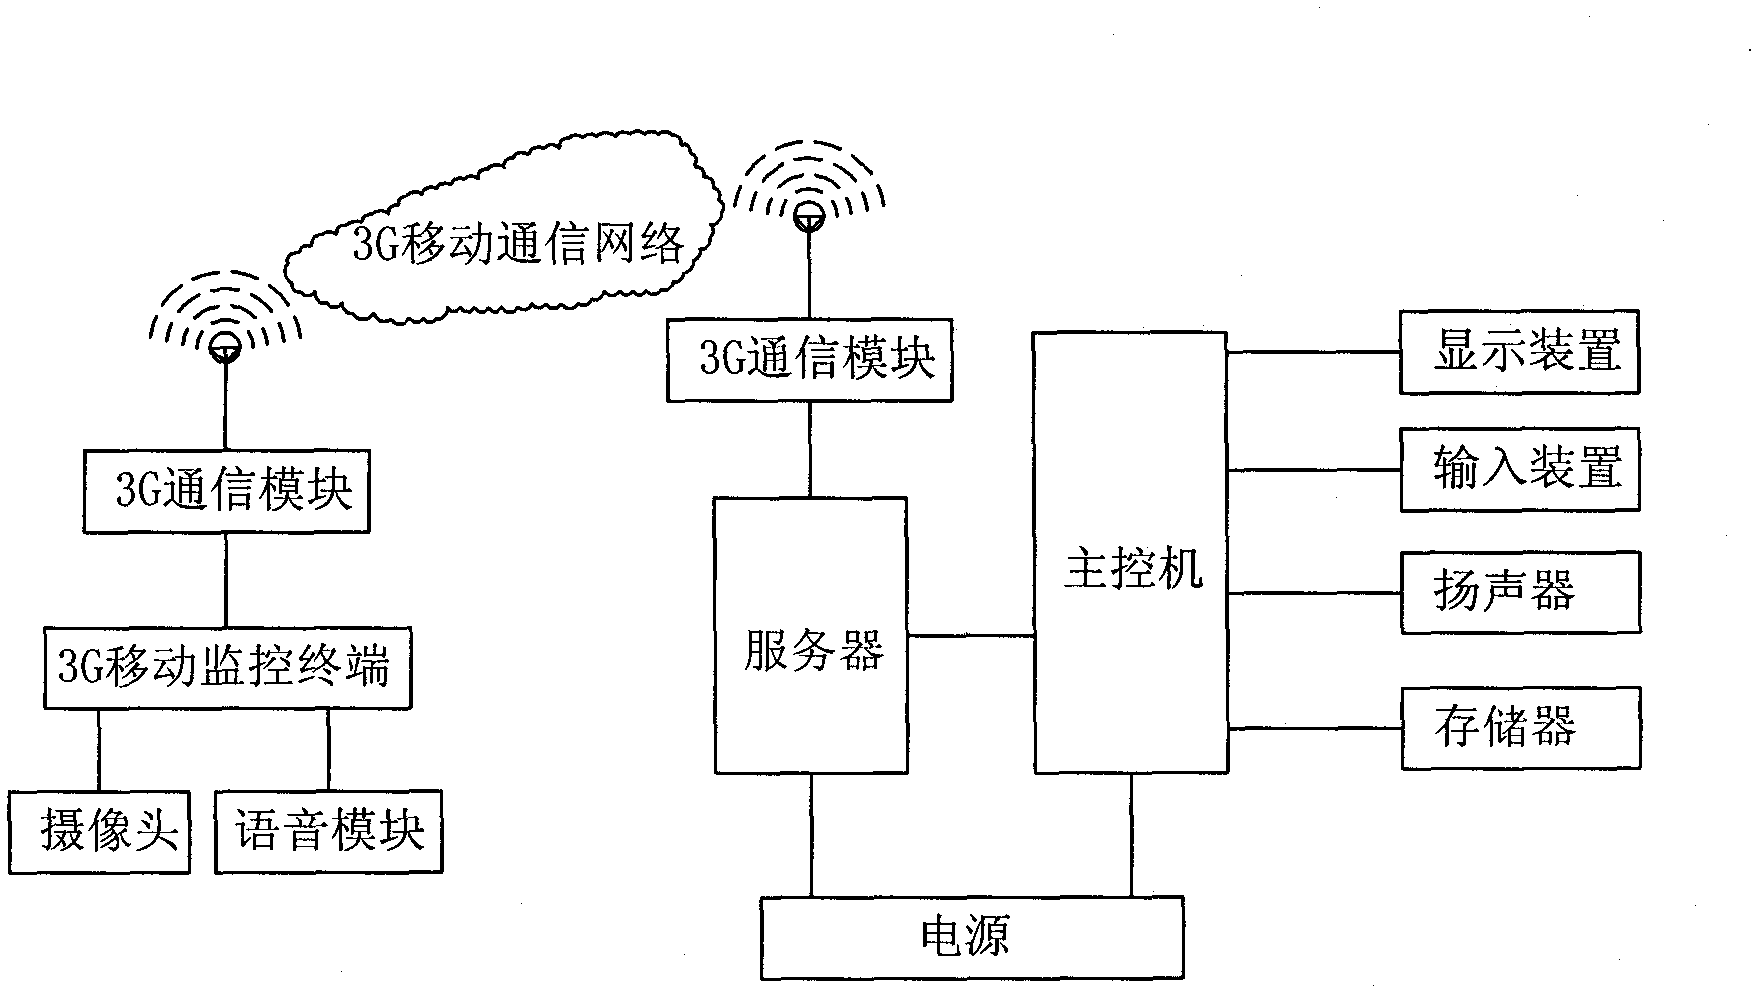 Monitoring system and method based on 3G (third generation) wireless communication network